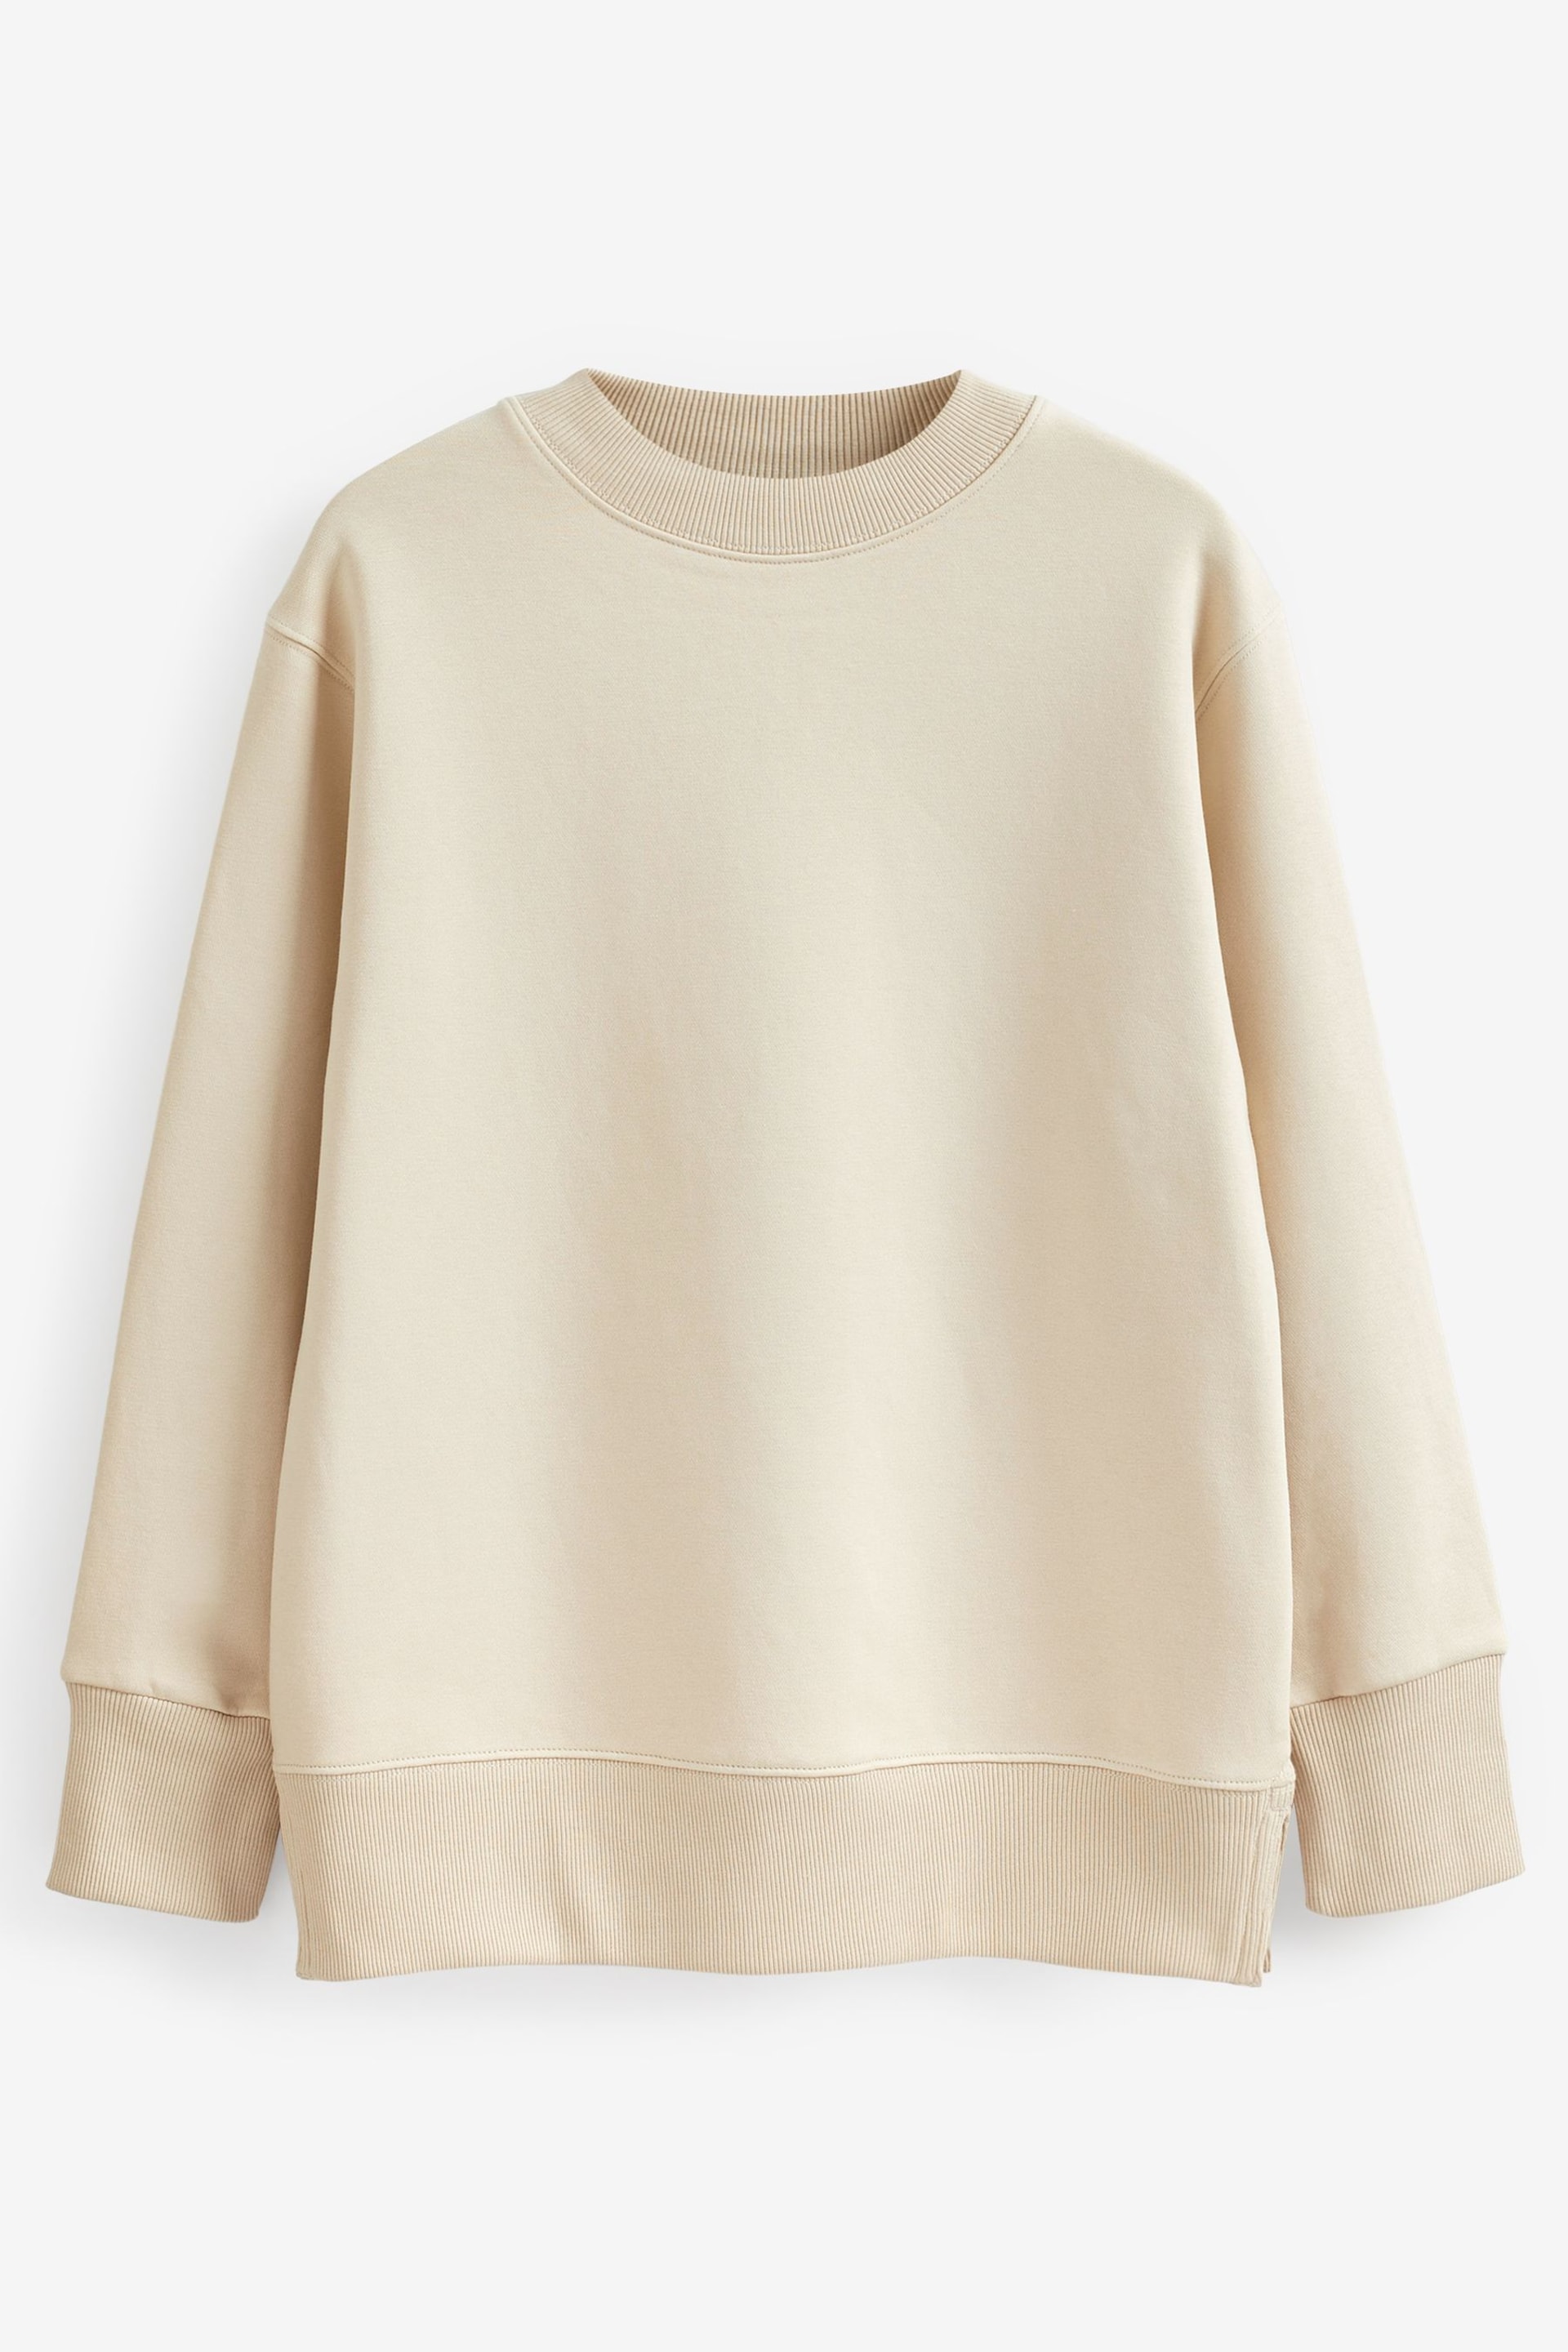 Neutral Essentials Longline Relaxed Fit Cotton Sweatshirt - Image 5 of 6